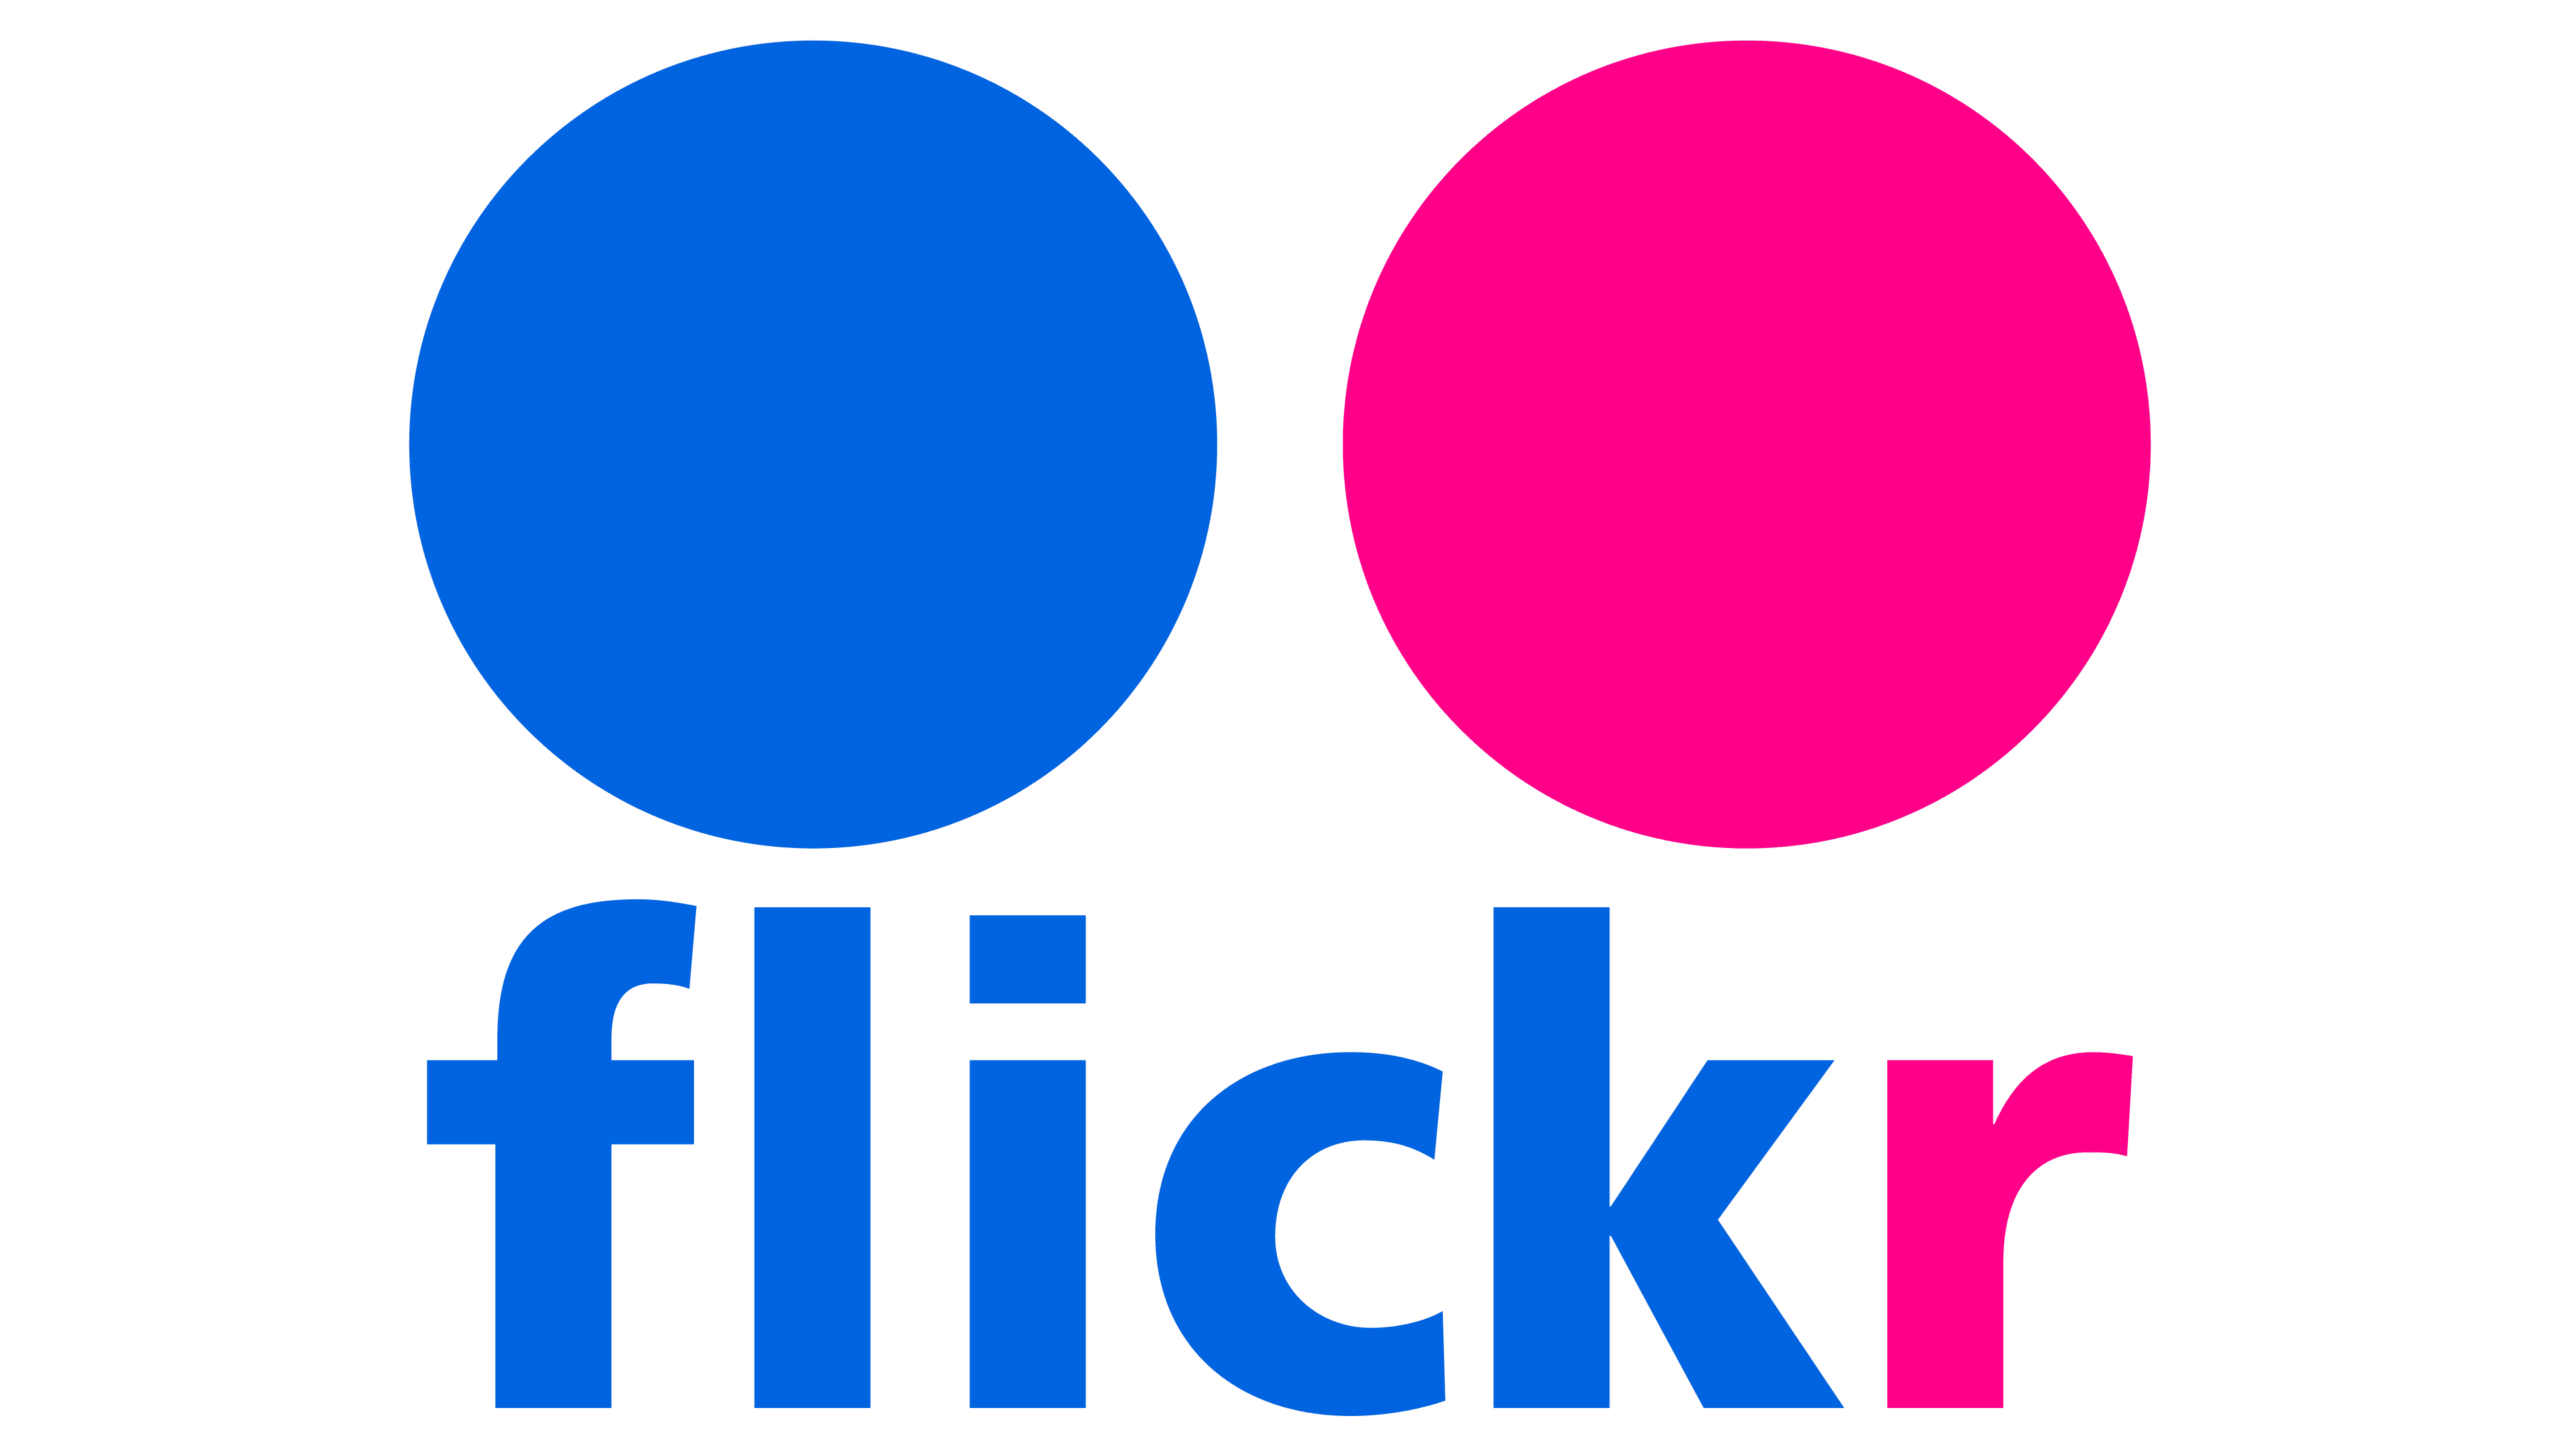 Proxy for flickr.com